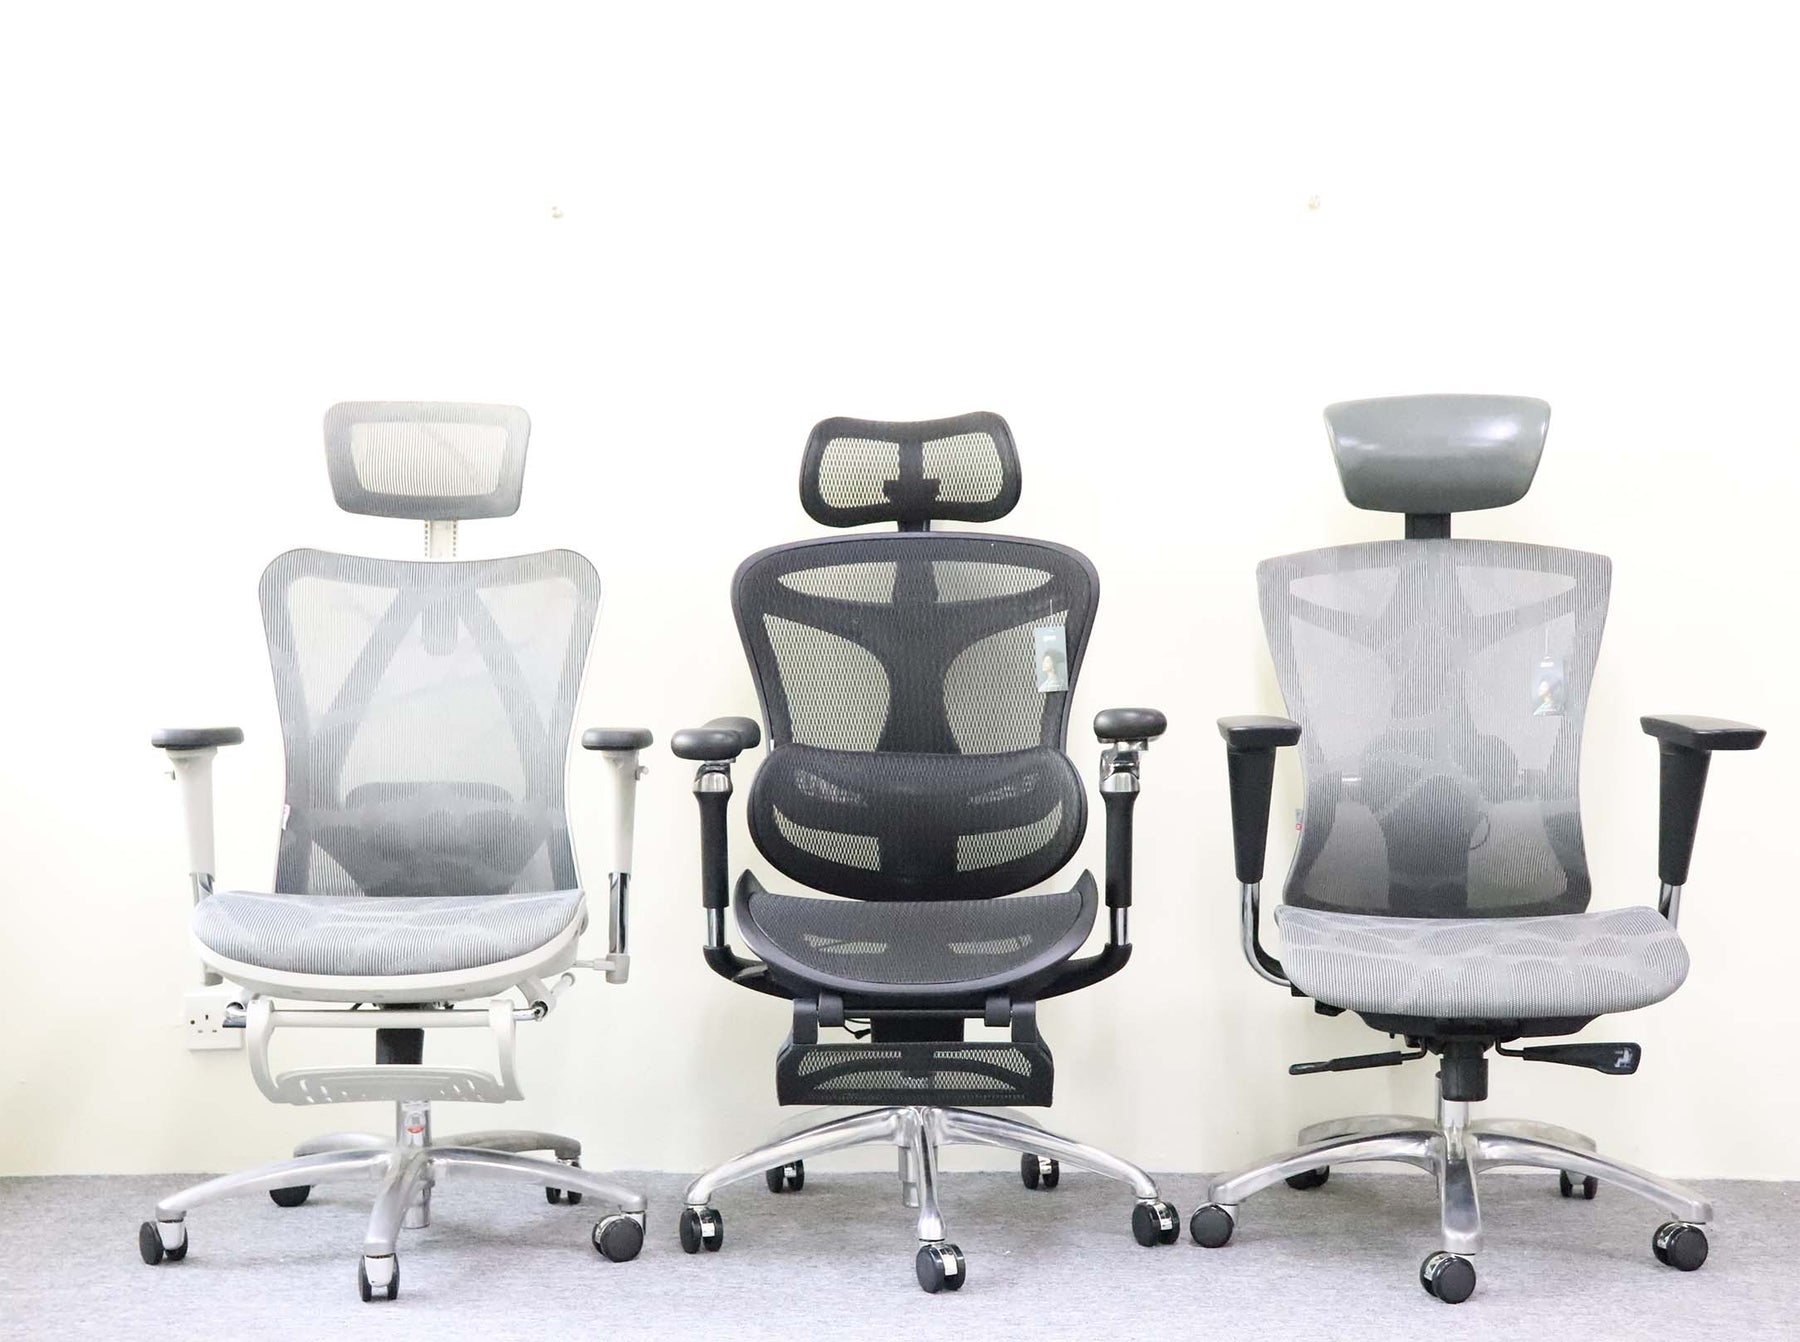 Best ergonomic chair in Malaysia by AITSULAB